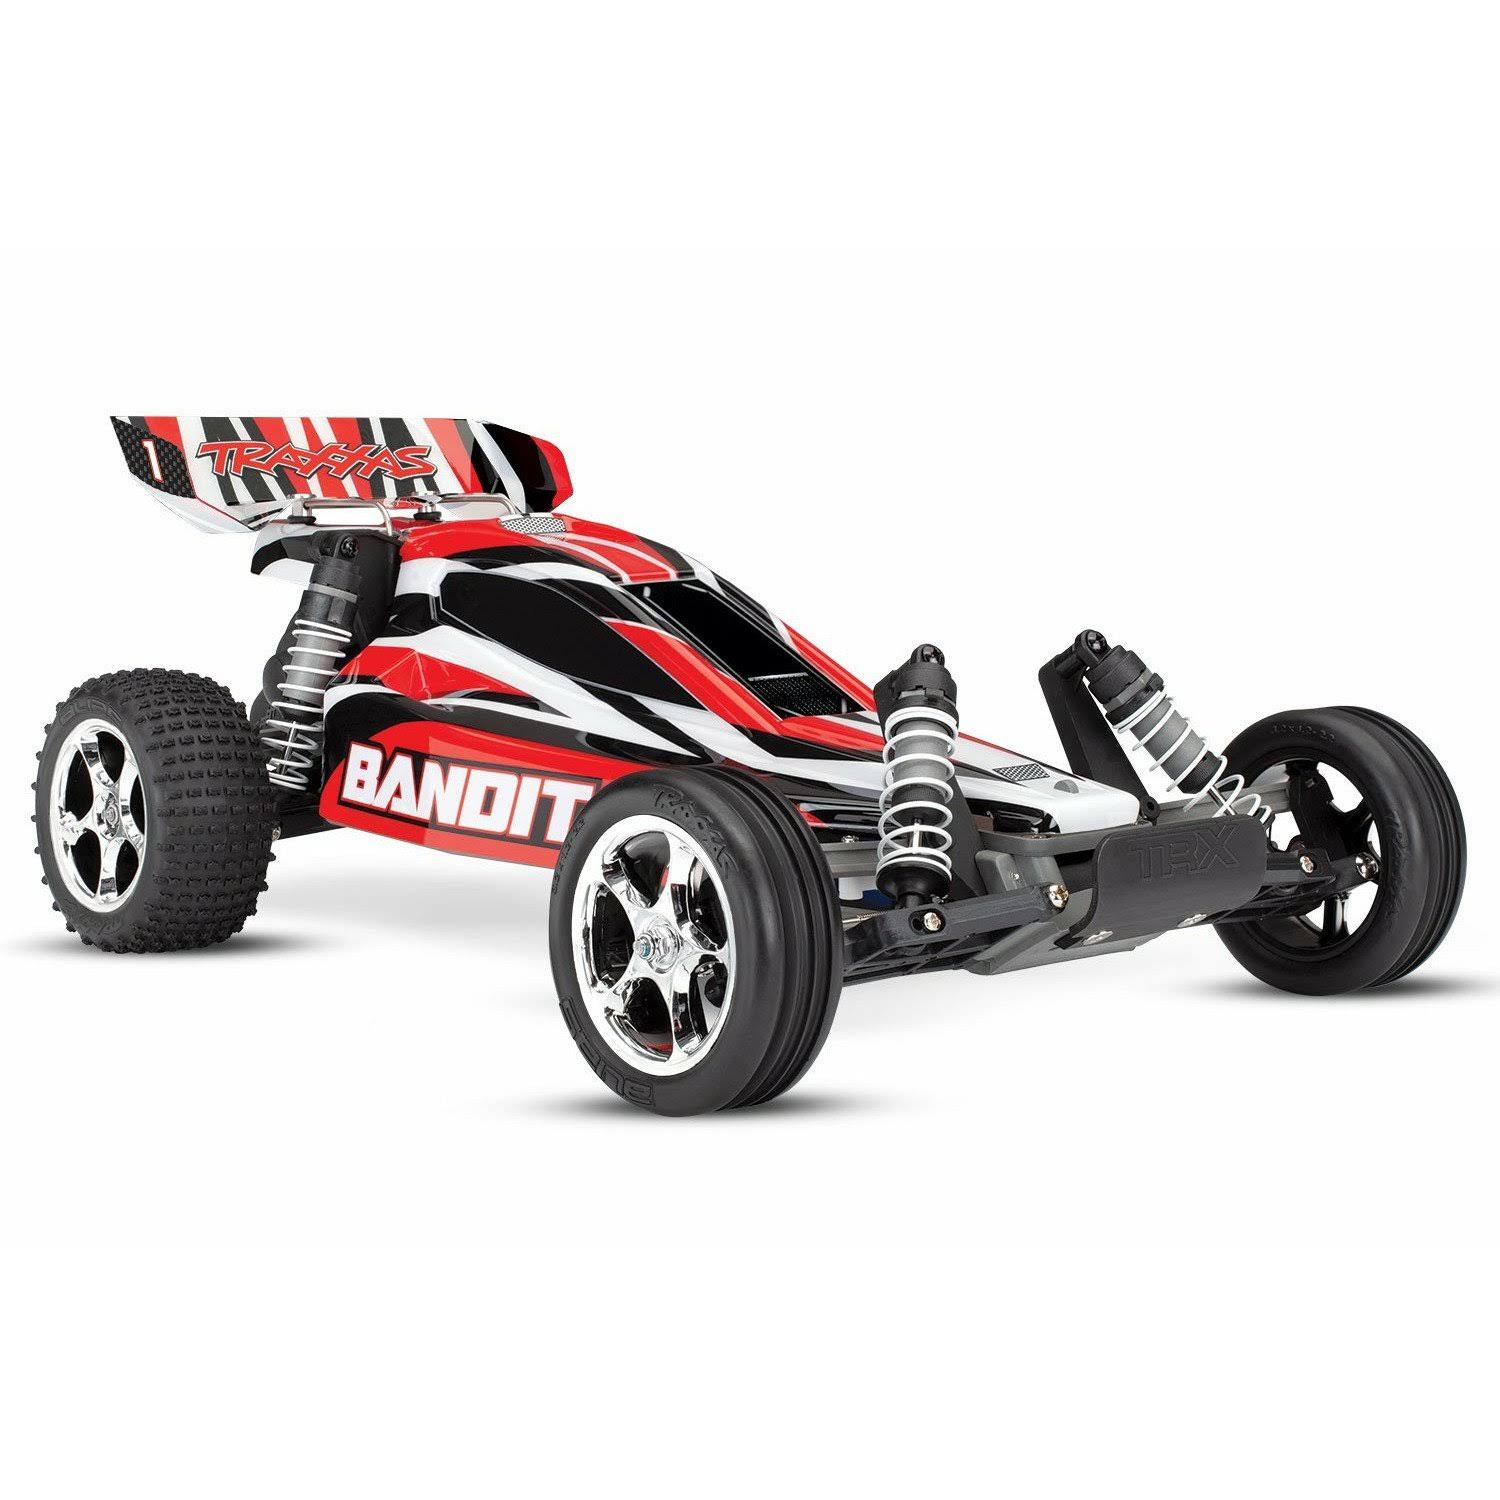 Traxxas 1/10 2WD Bandit Extreme Sports Buggy RTR - Redx